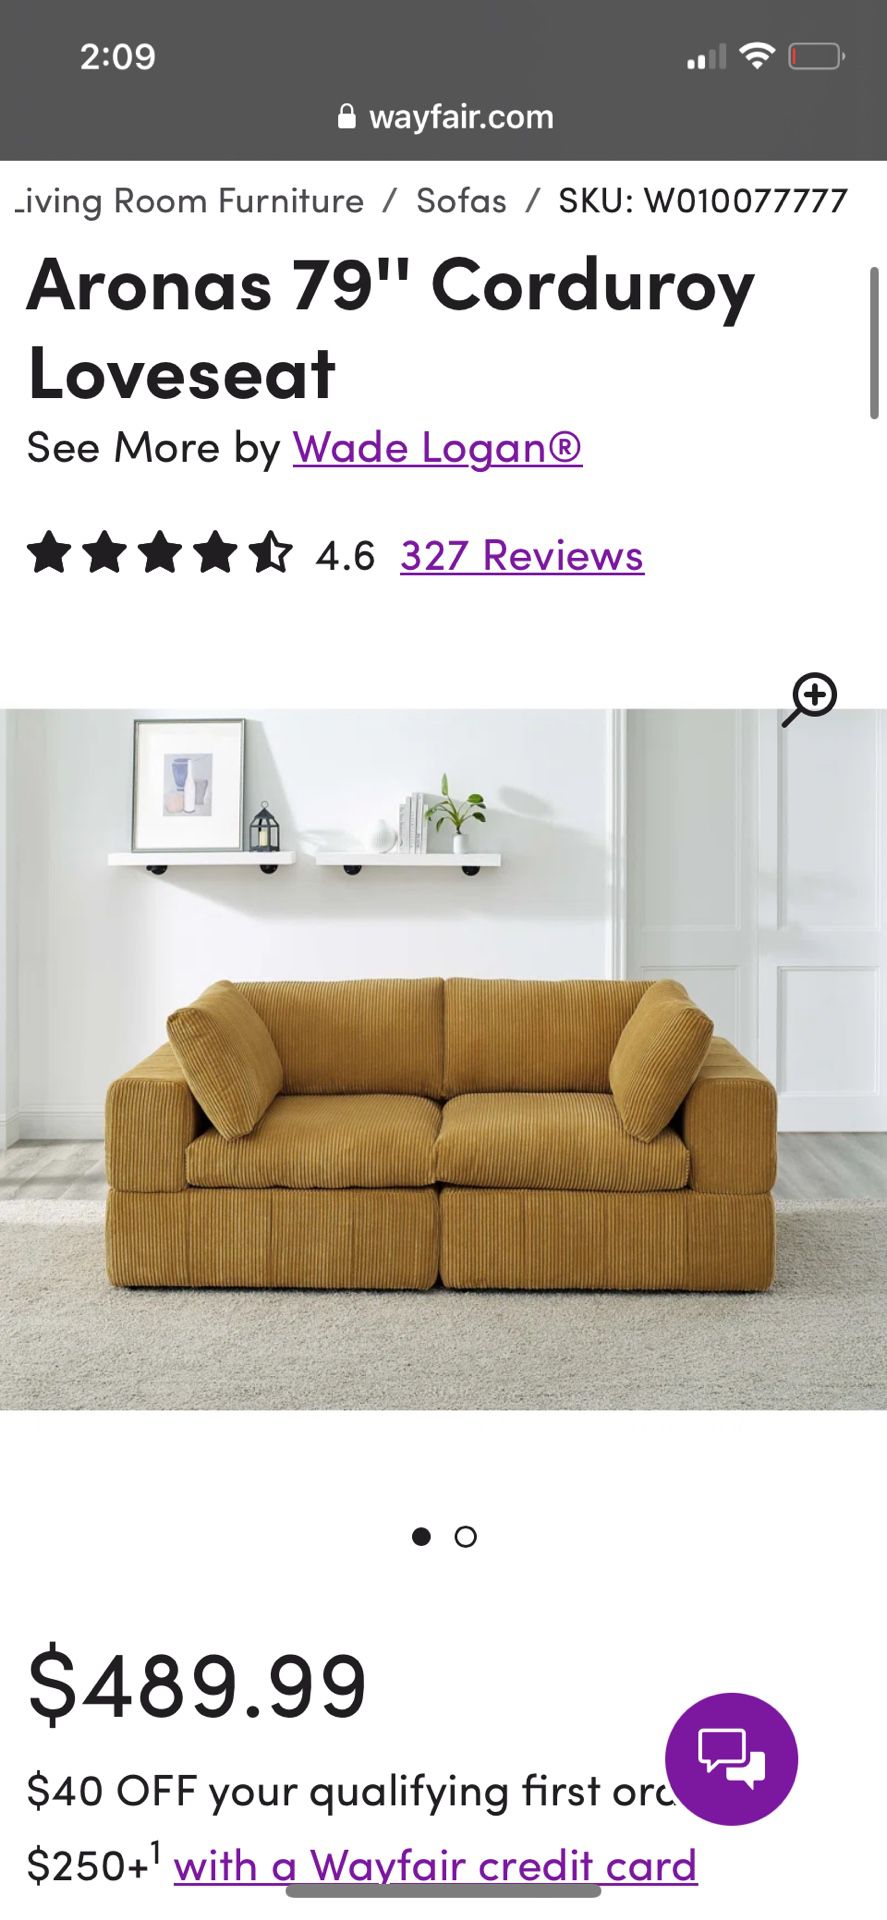 Comfortable Small Couch